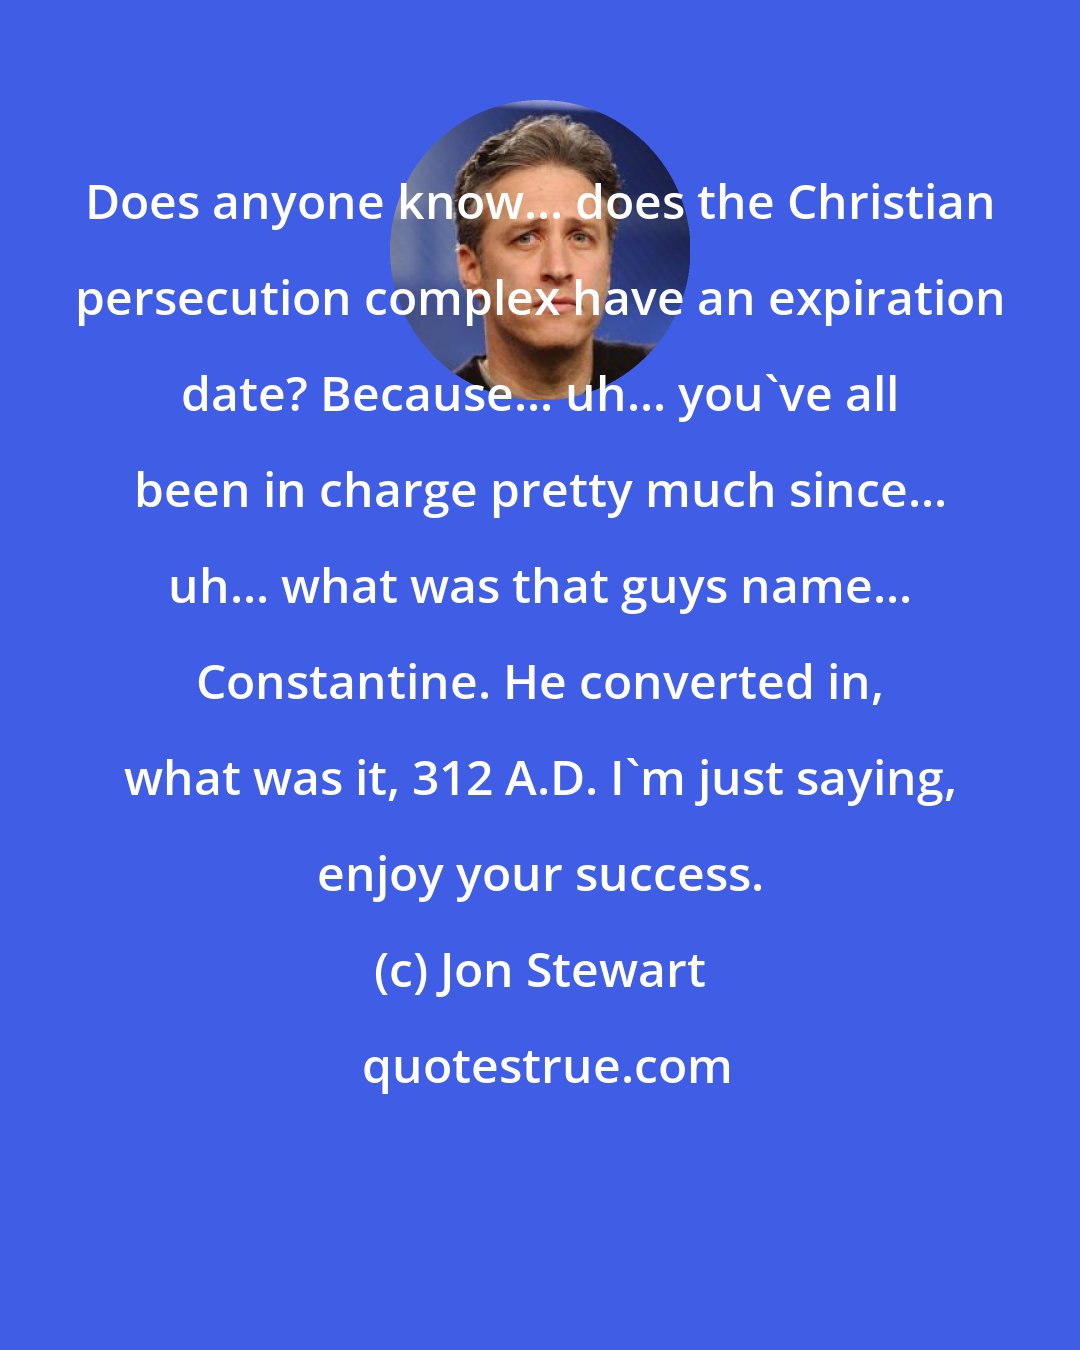 Jon Stewart: Does anyone know... does the Christian persecution complex have an expiration date? Because... uh... you've all been in charge pretty much since... uh... what was that guys name... Constantine. He converted in, what was it, 312 A.D. I'm just saying, enjoy your success.